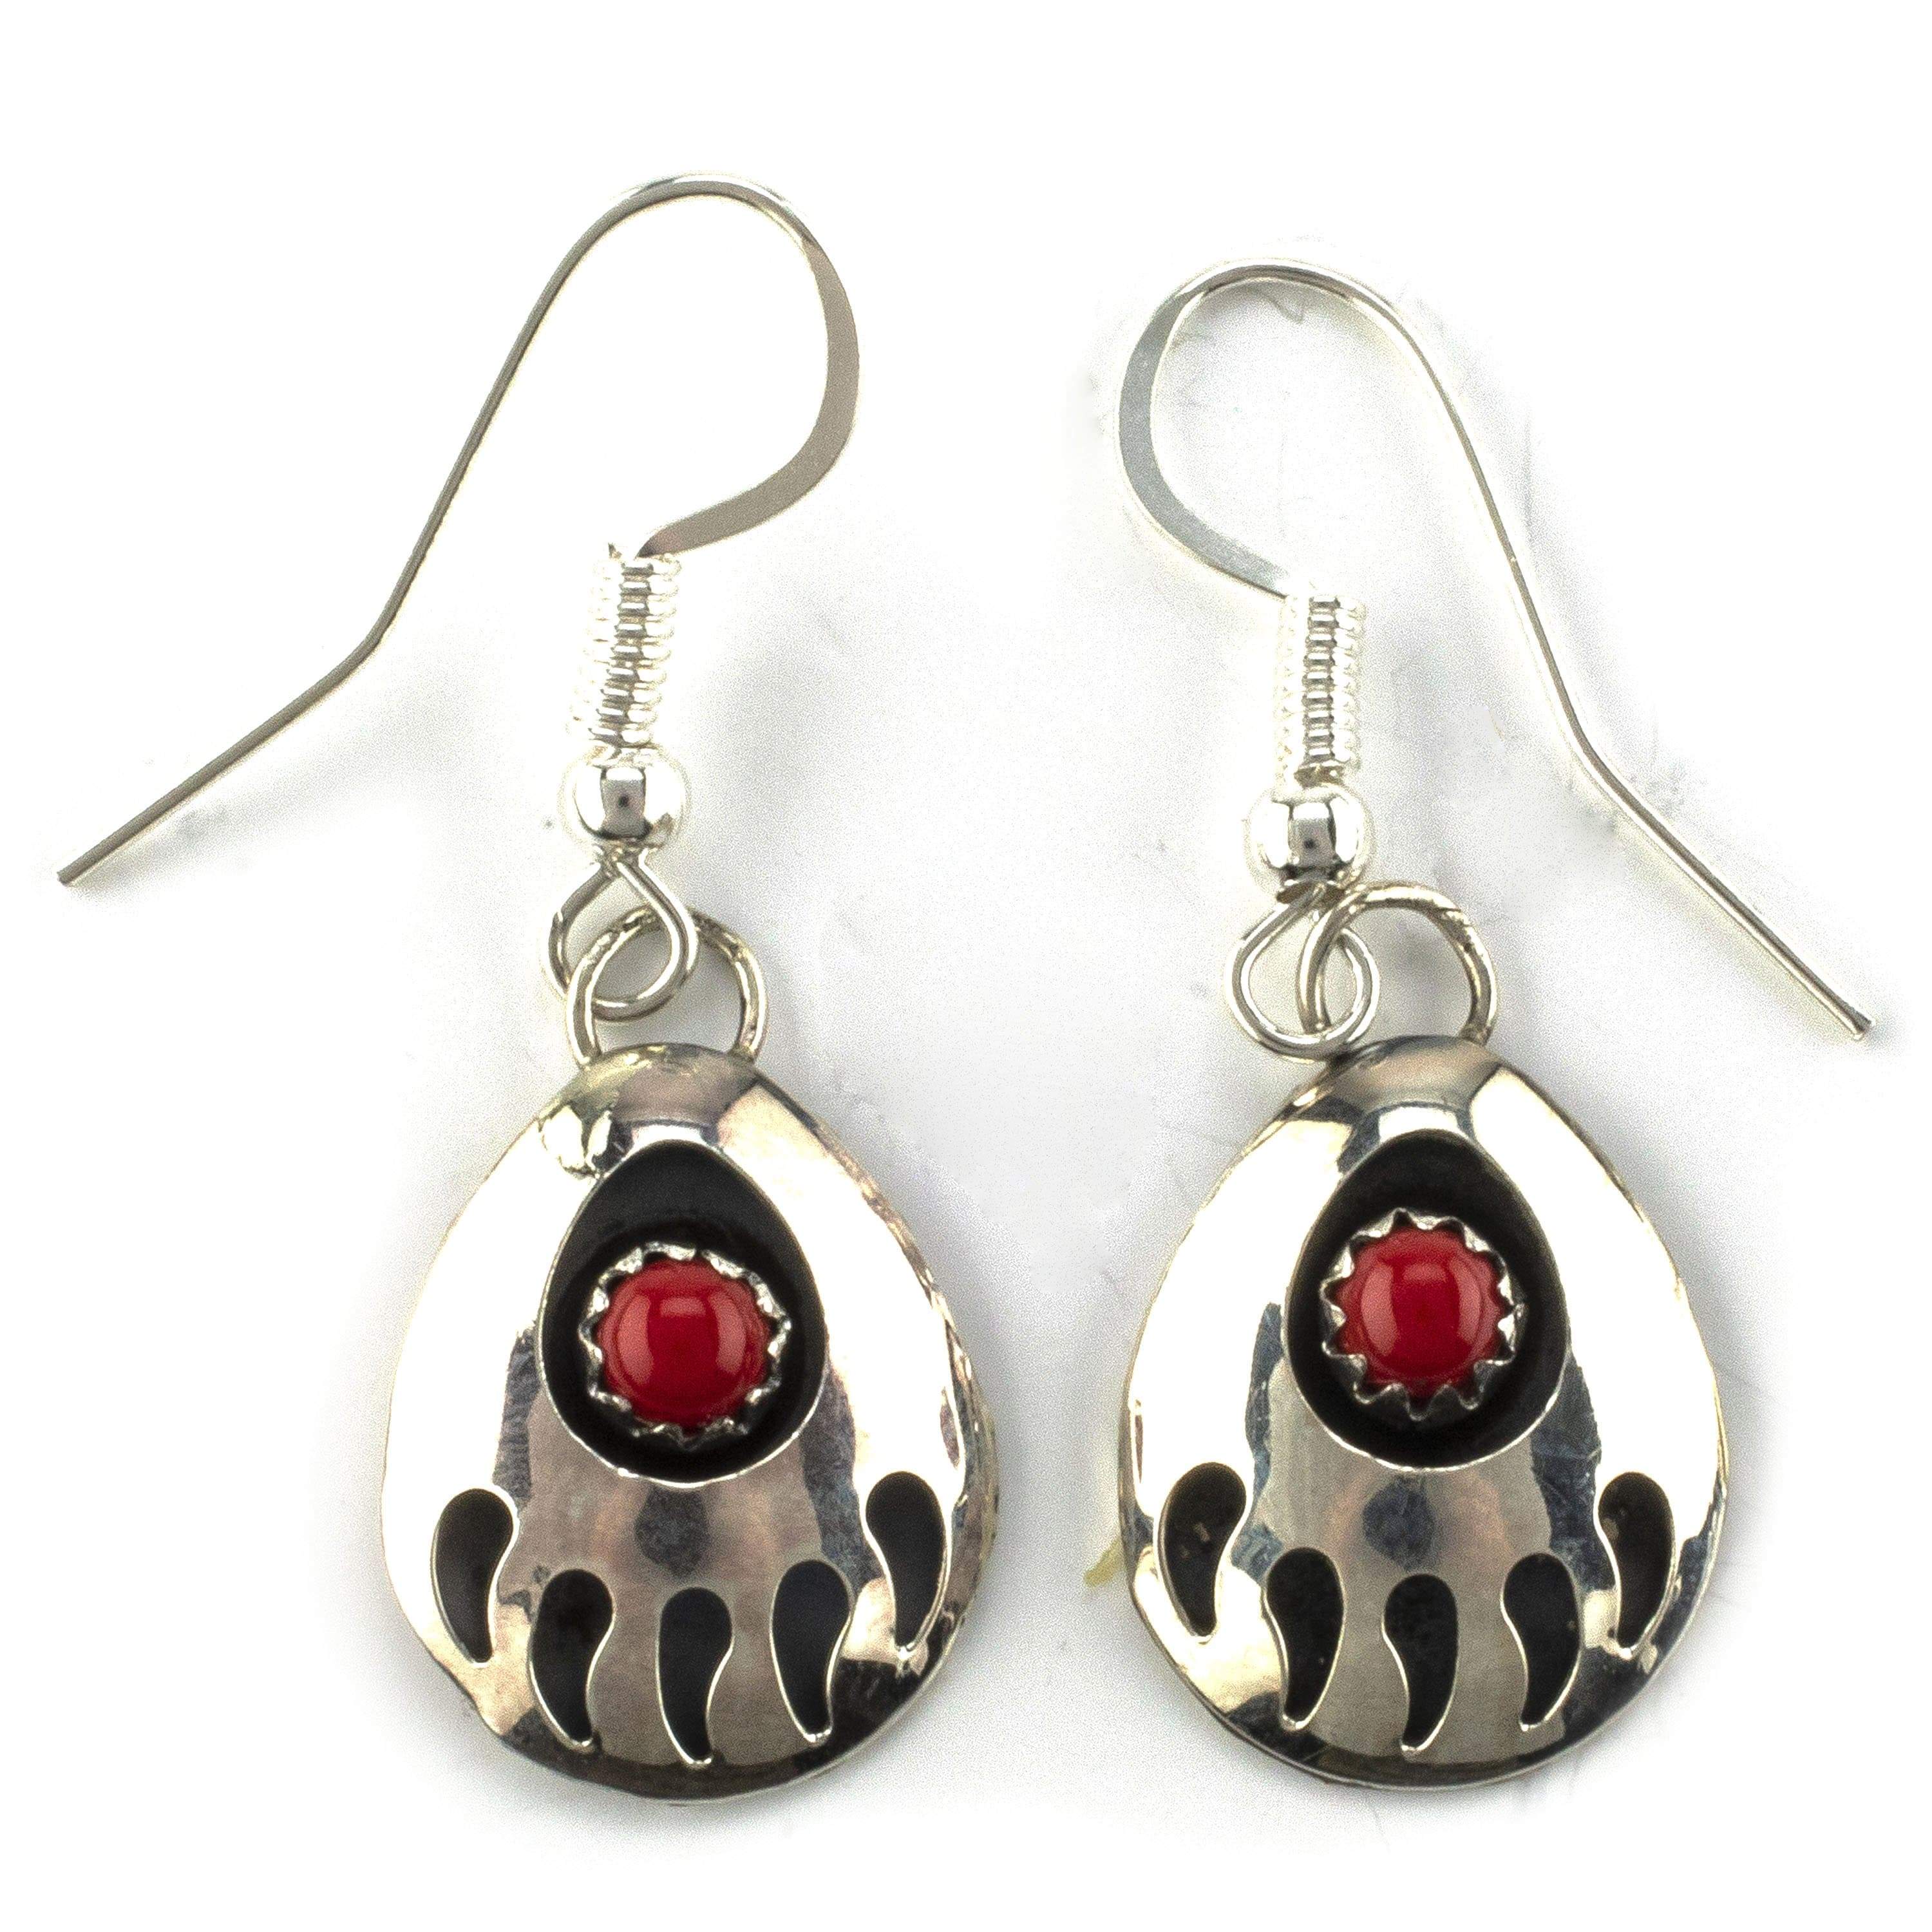 Kalifano Native American Jewelry Bear Claw with Coral Inlay USA Native American Made 925 Sterling Silver Earrings with French Hook NAE80.002